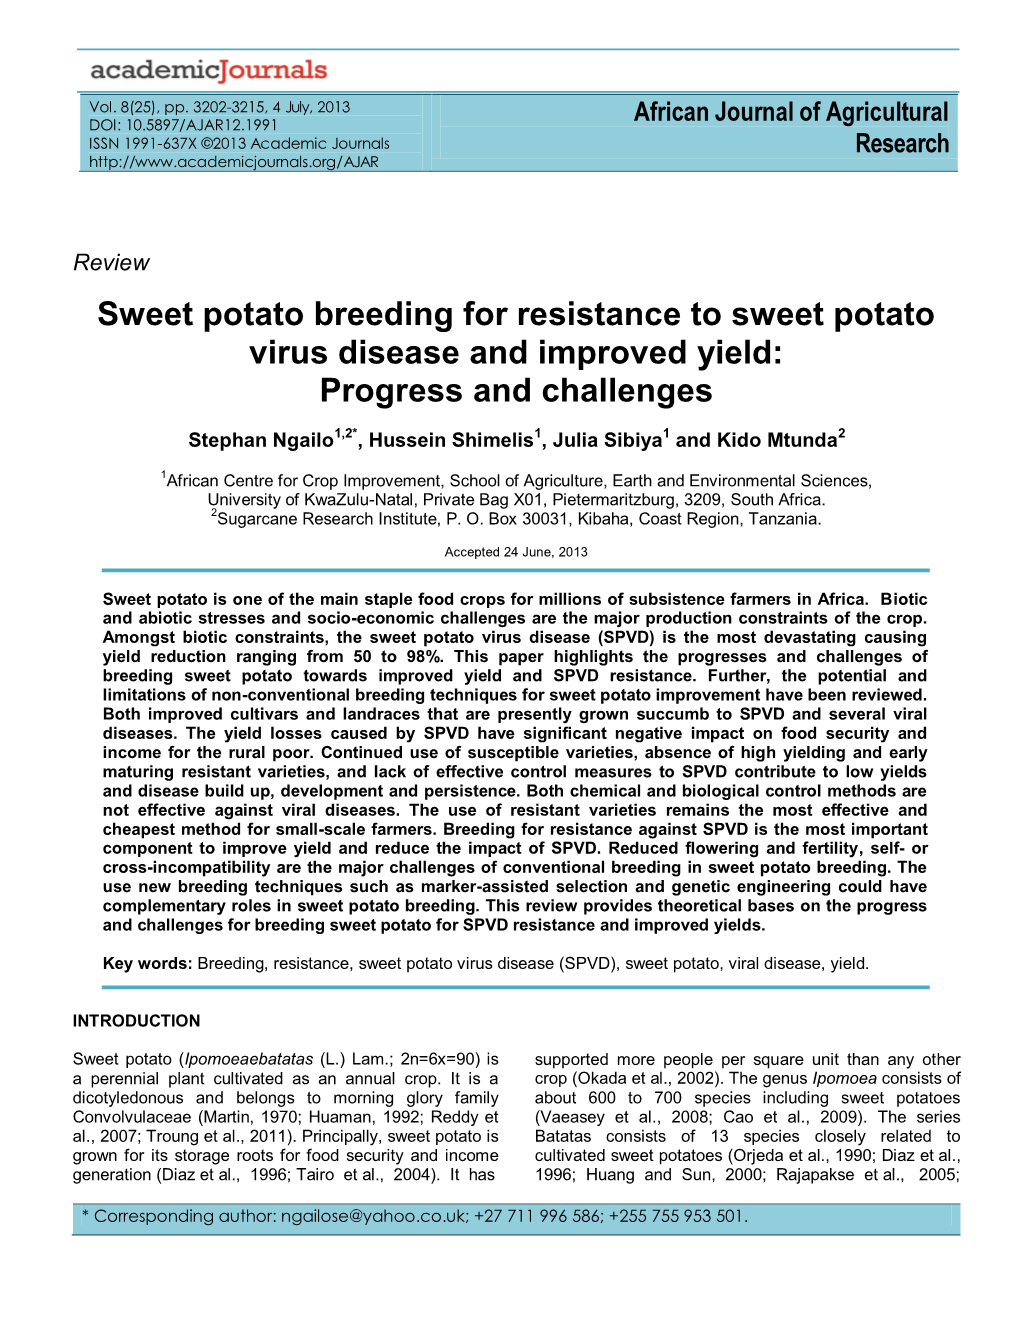 Sweet Potato Breeding for Resistance to Sweet Potato Virus Disease and Improved Yield: Progress and Challenges